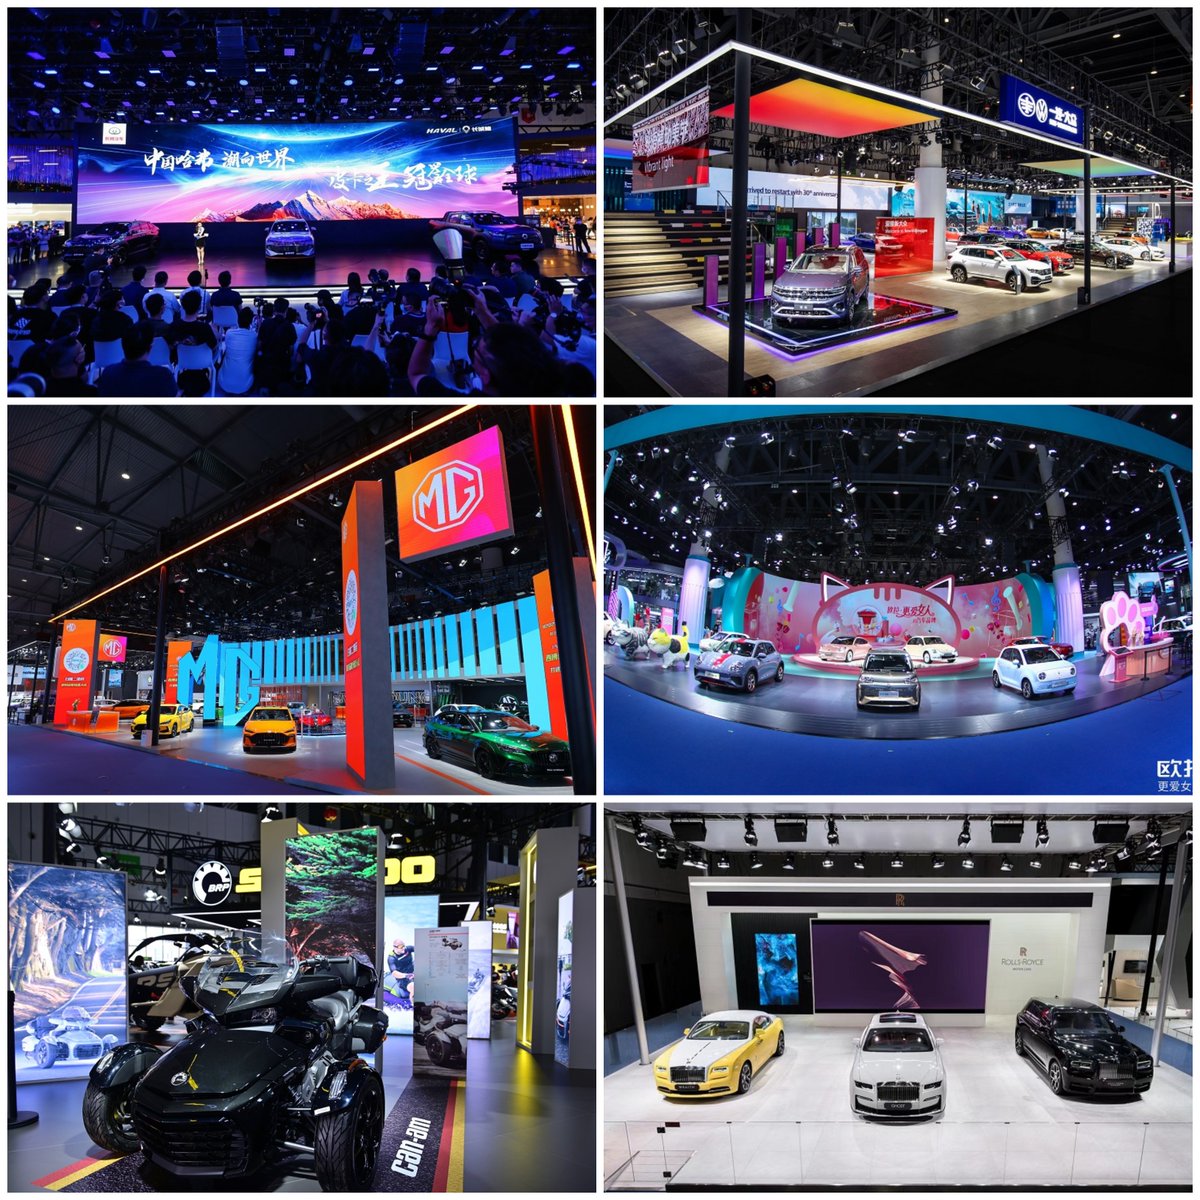 #ChengduMotorShow Highlights: Here are the stunning booths of #BRP, #FAWVolkswagen, @GWMGlobal, #ORA, @rollsroycecars & @SaicMotormg activated by #Pico Beijing.
More highlights: bit.ly/3jhSy35
#PicoPlus #ExhibitionManagement #EventManagement #ExhibitionPlanningCompany